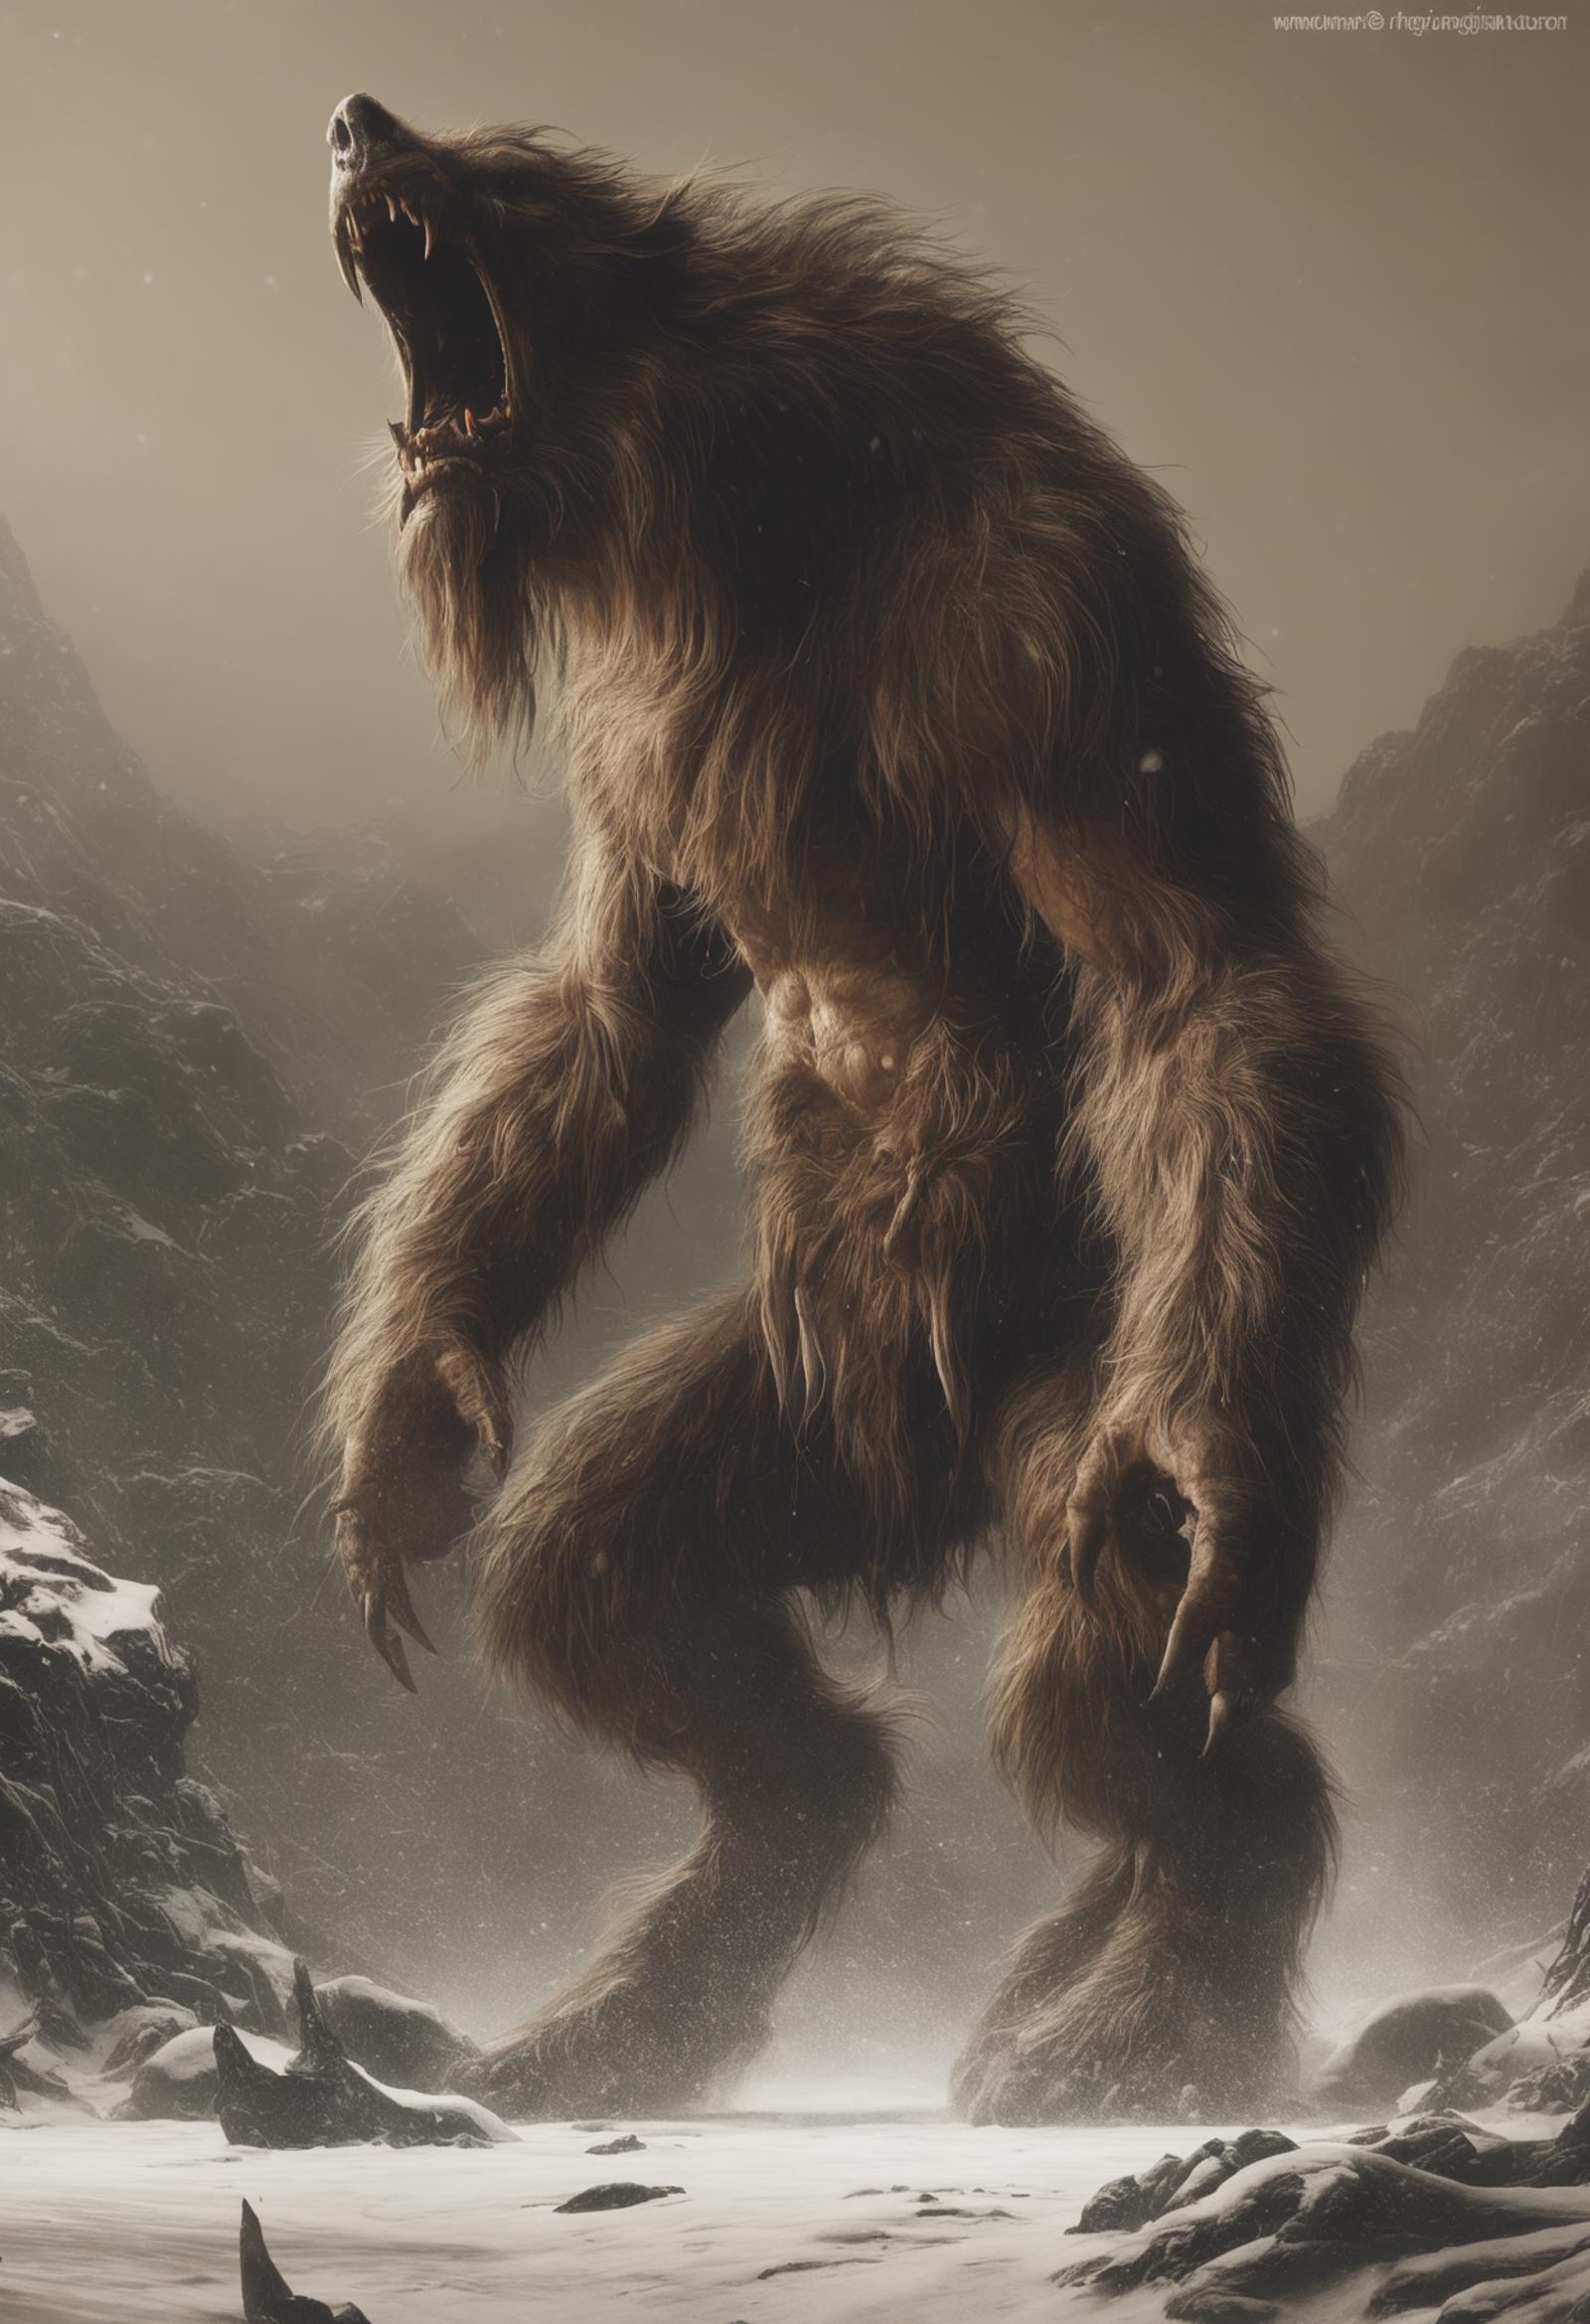 A computer generated image of a hairy, large, and menacing creature with a mouth full of teeth, standing in a snowy landscape.